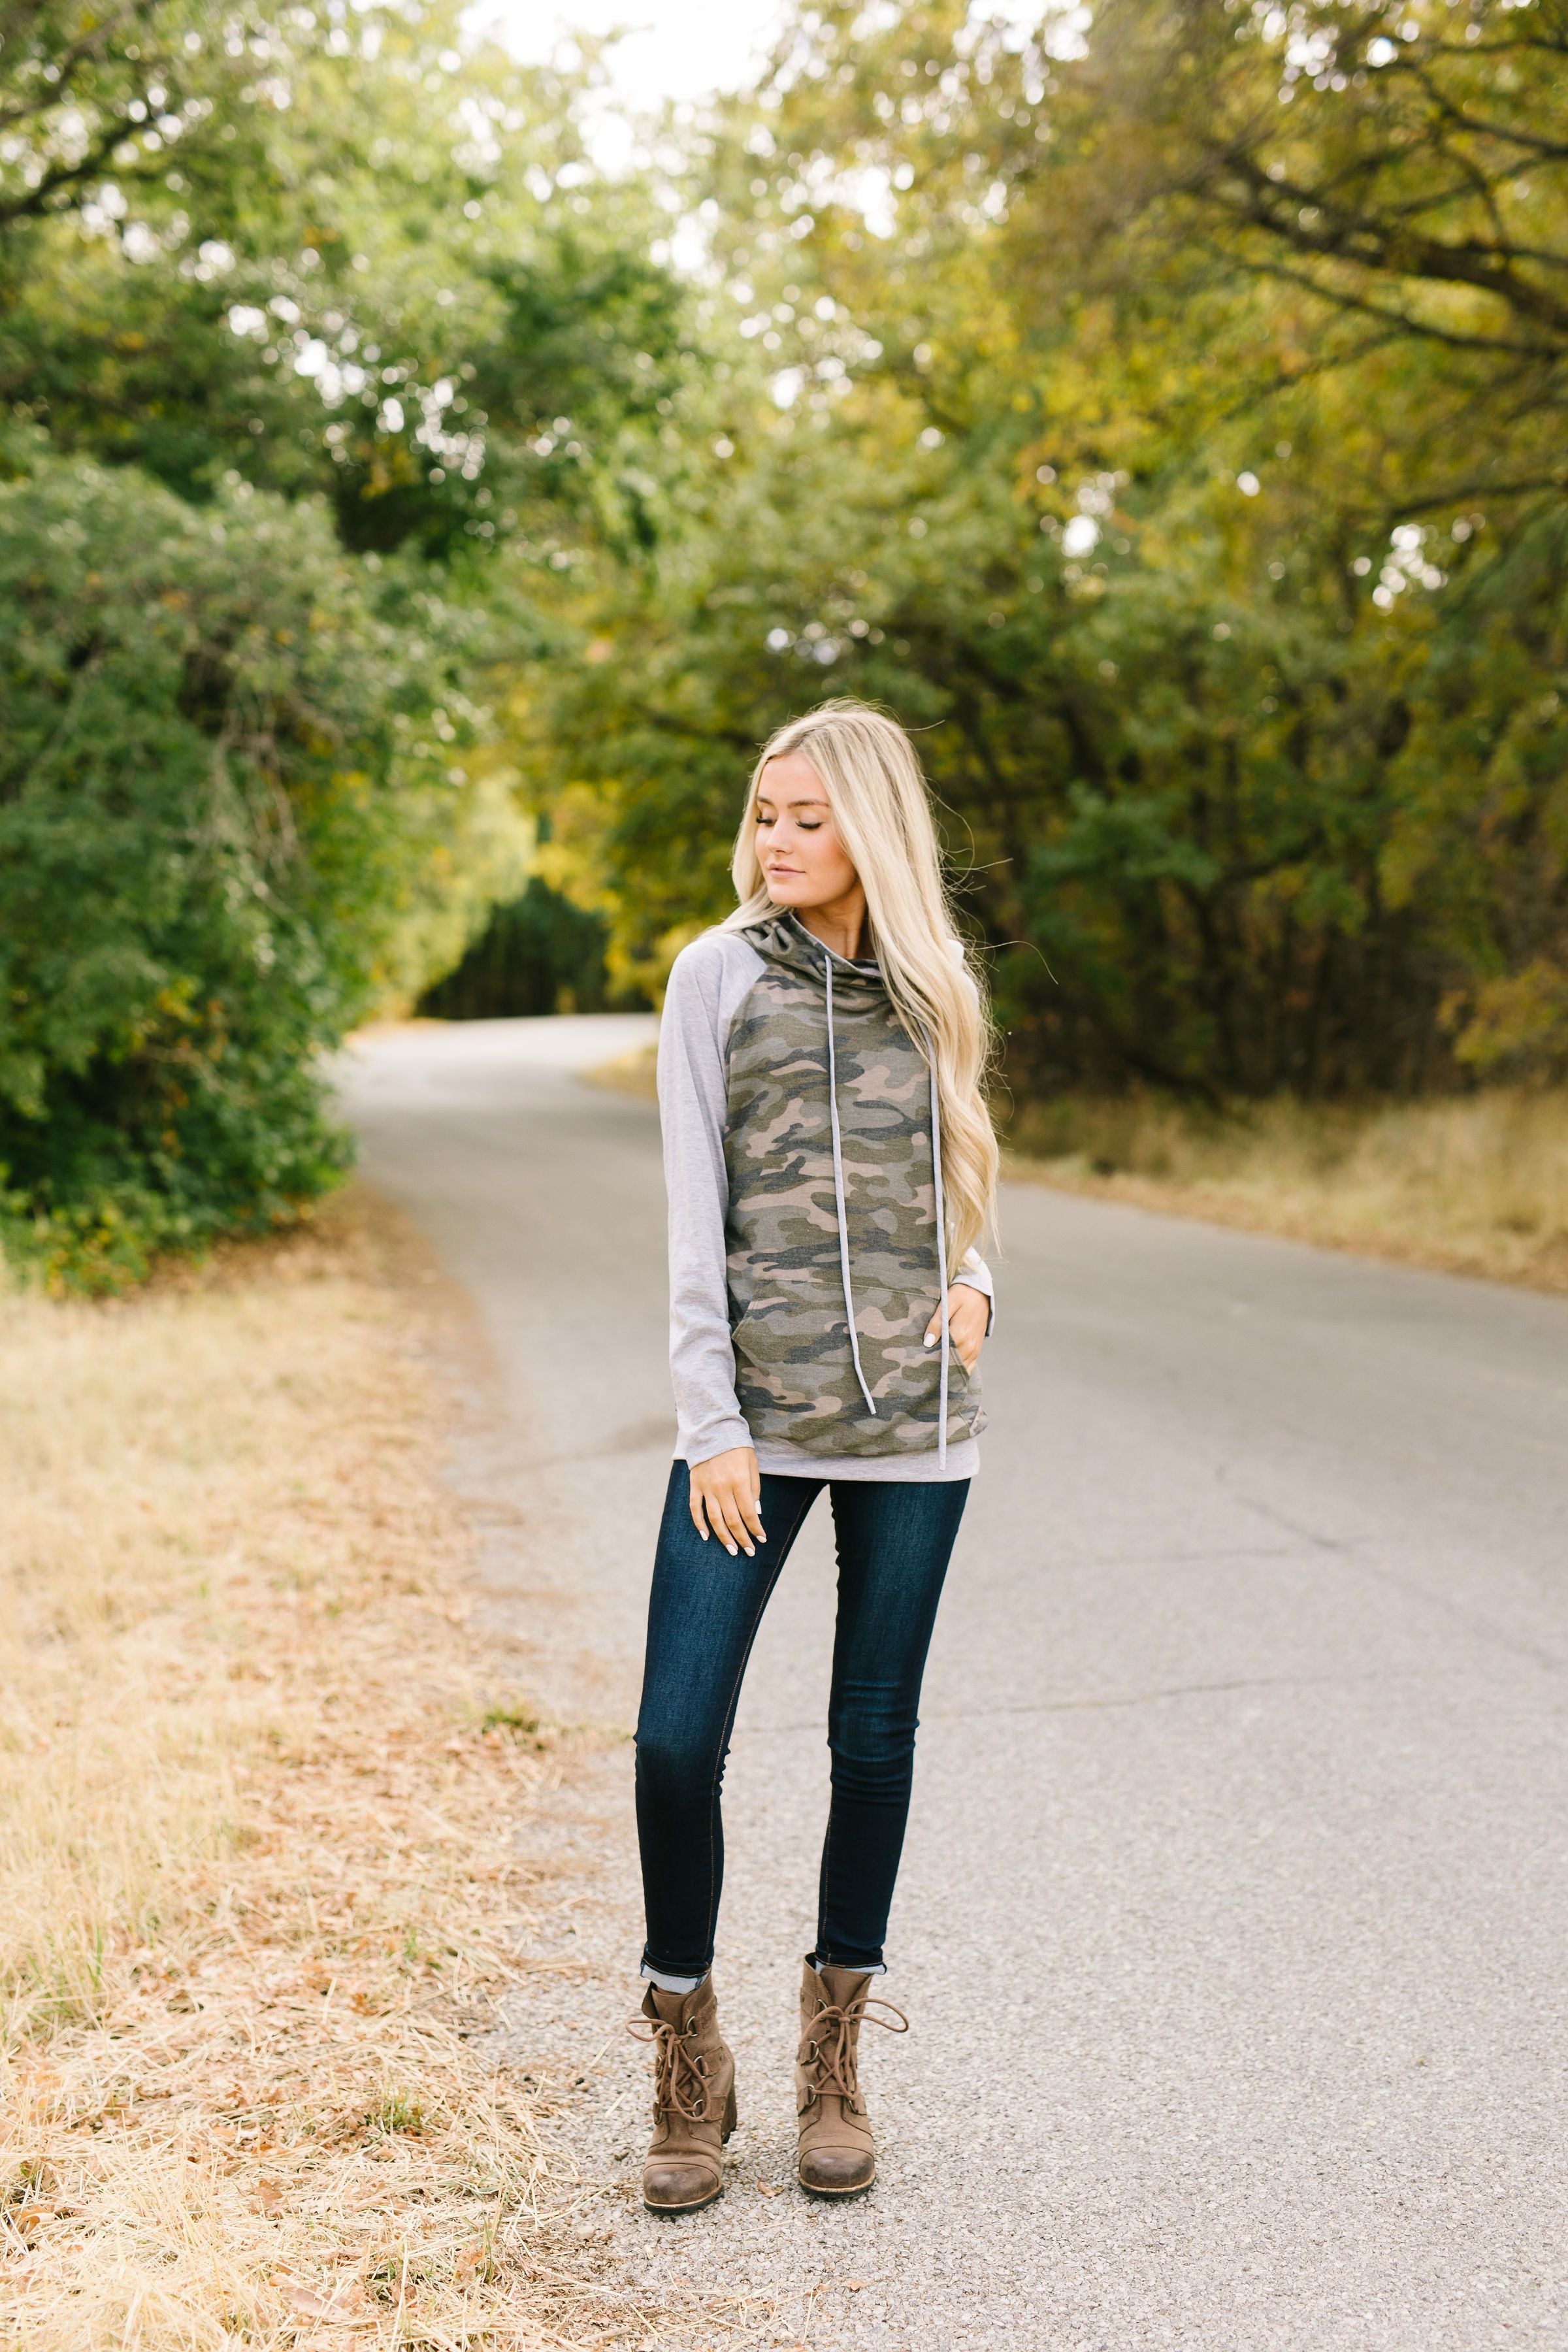 Camo Is The New Black Hoodie - ALL SALES FINAL